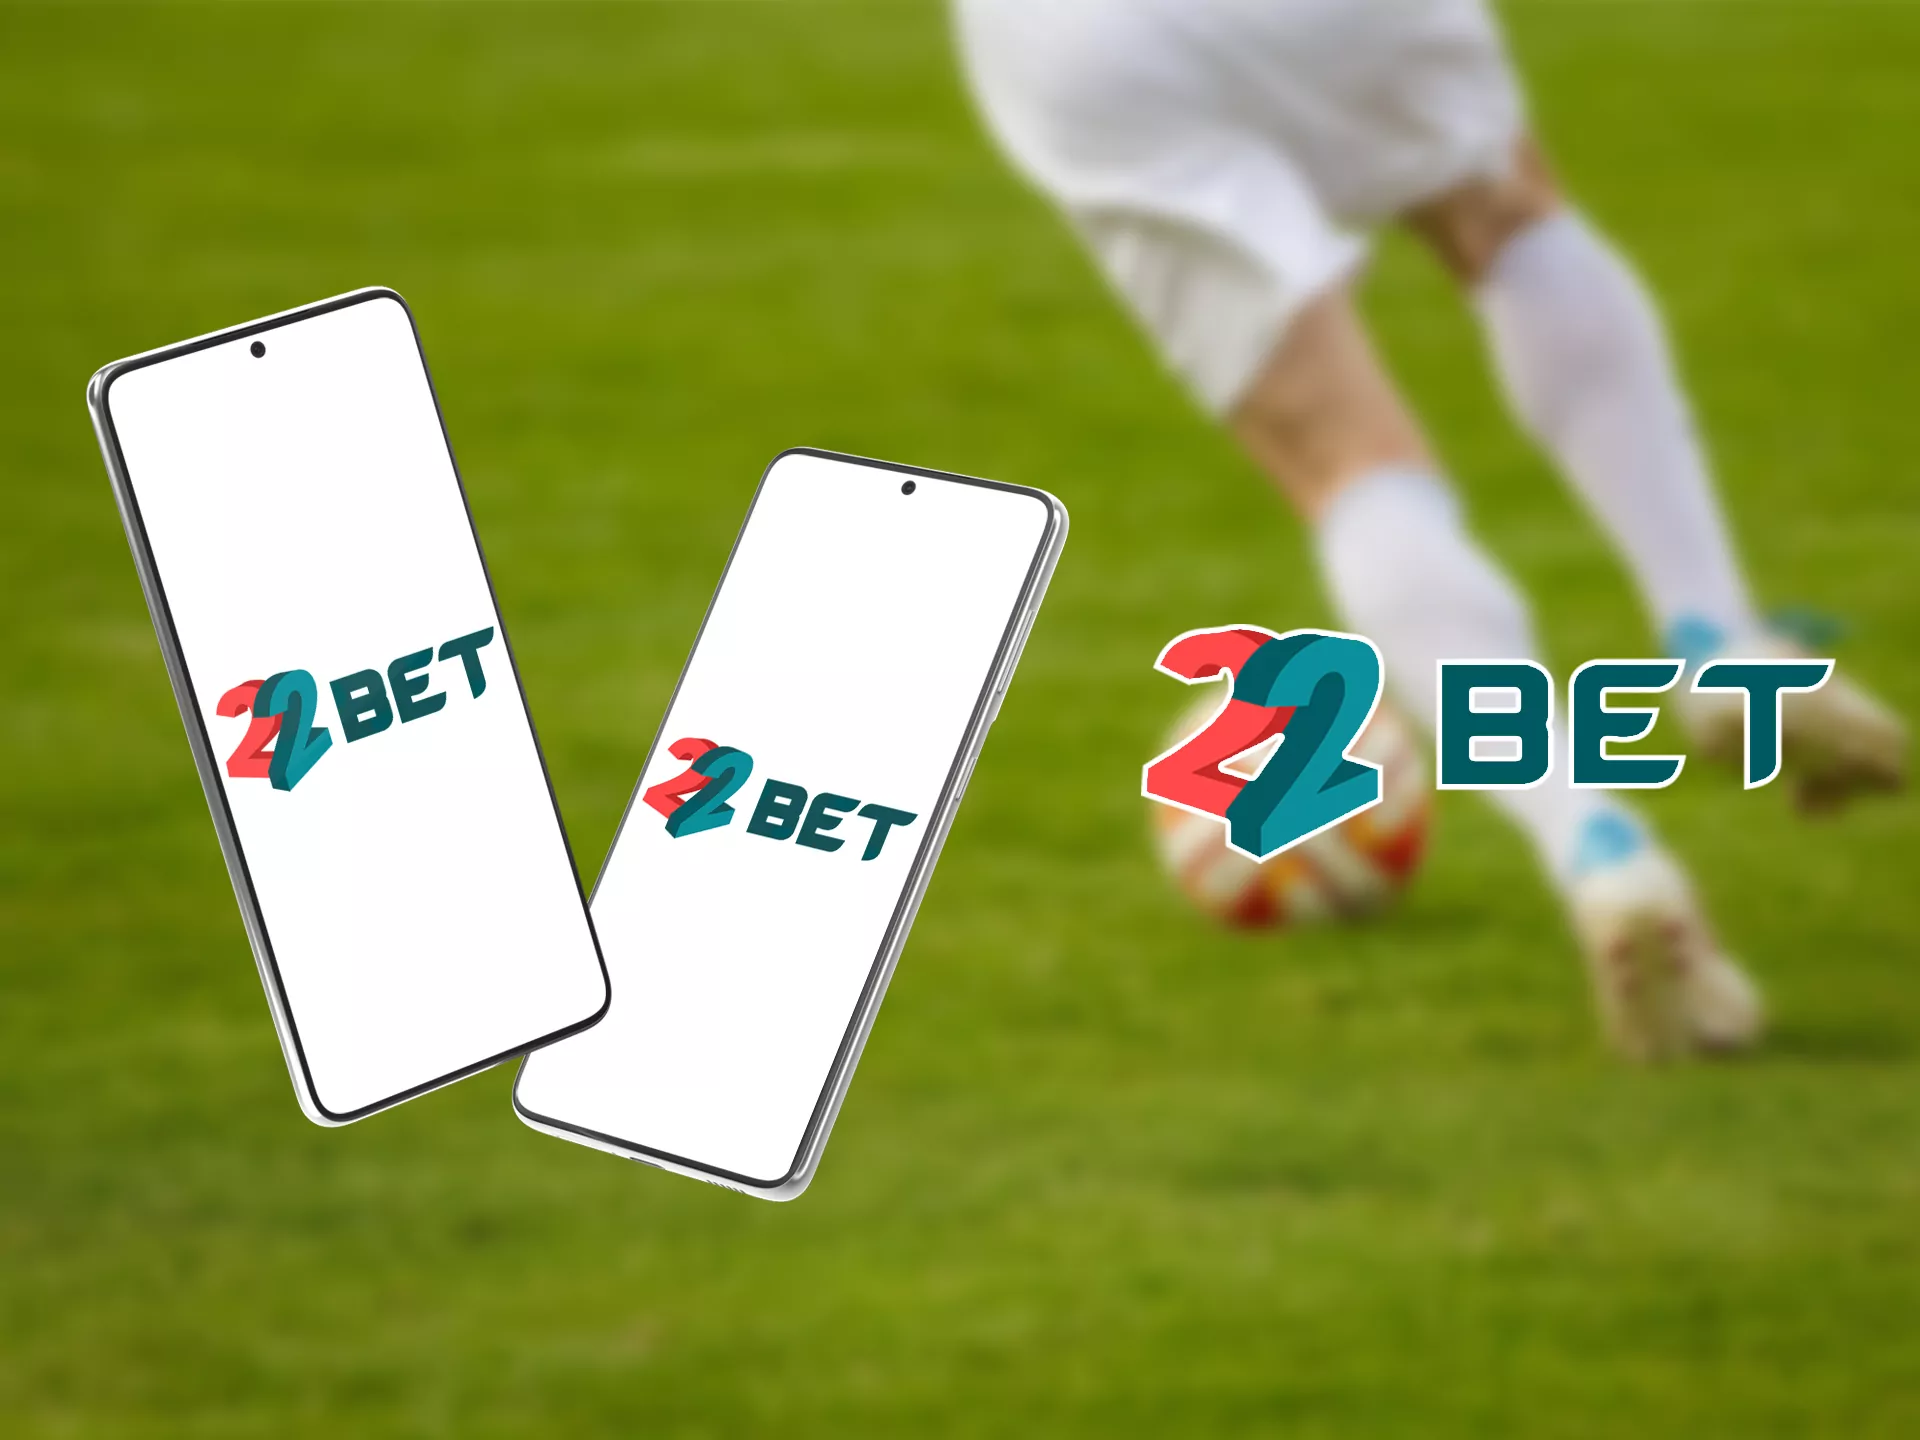 22bet is a best soccer betting company.